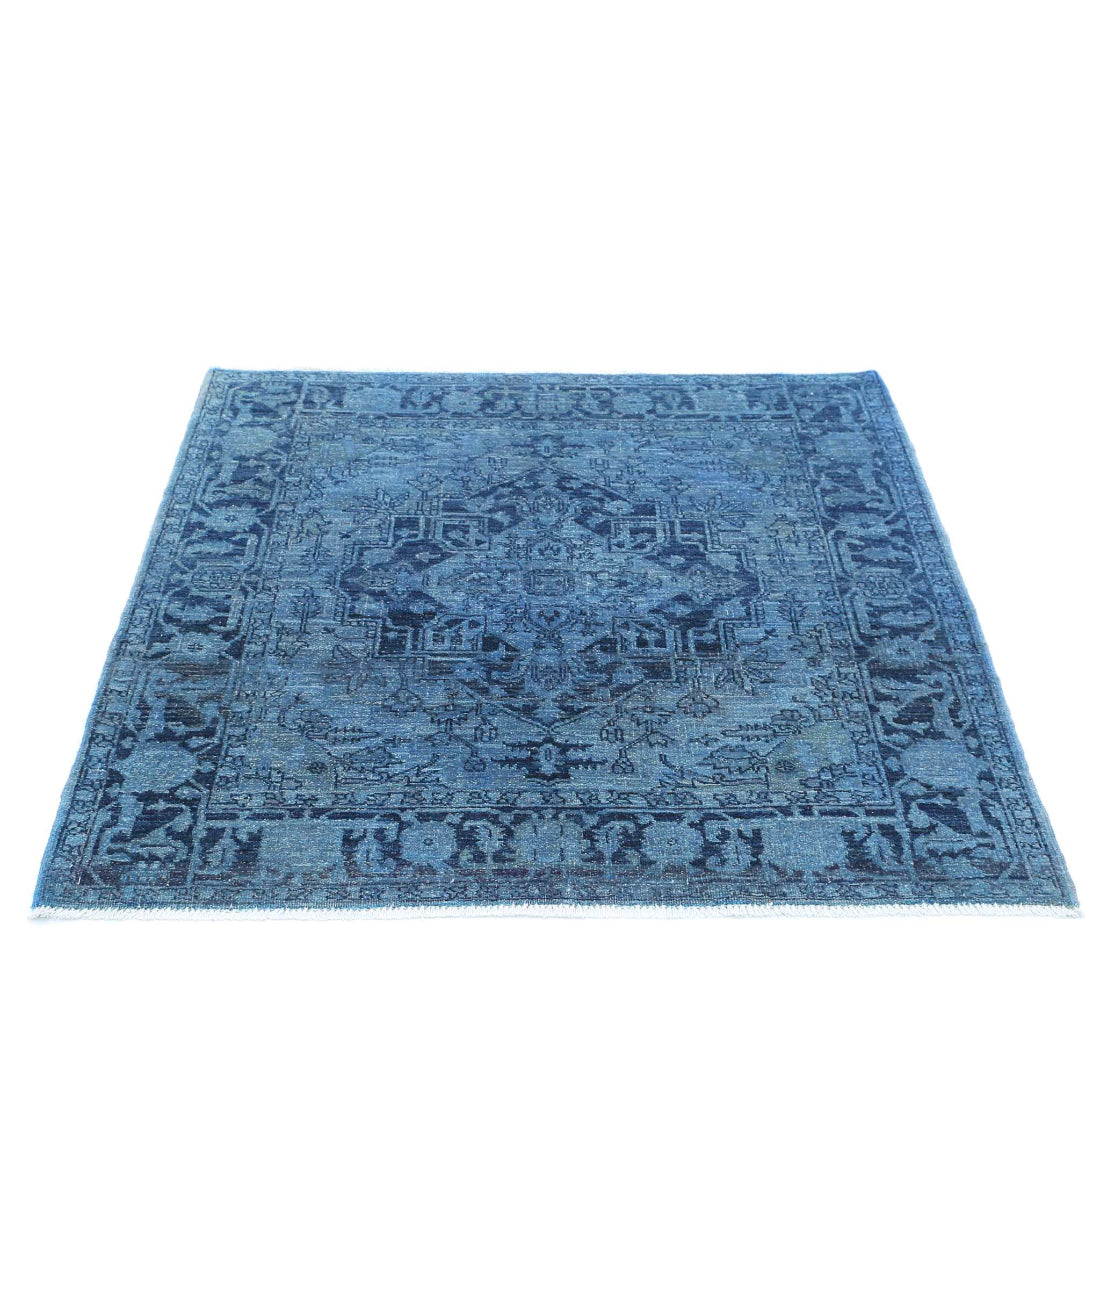 Hand Knotted Overdye Wool Rug - 4'1'' x 4'4'' 4'1'' x 4'4'' (123 X 130) / Blue / Blue